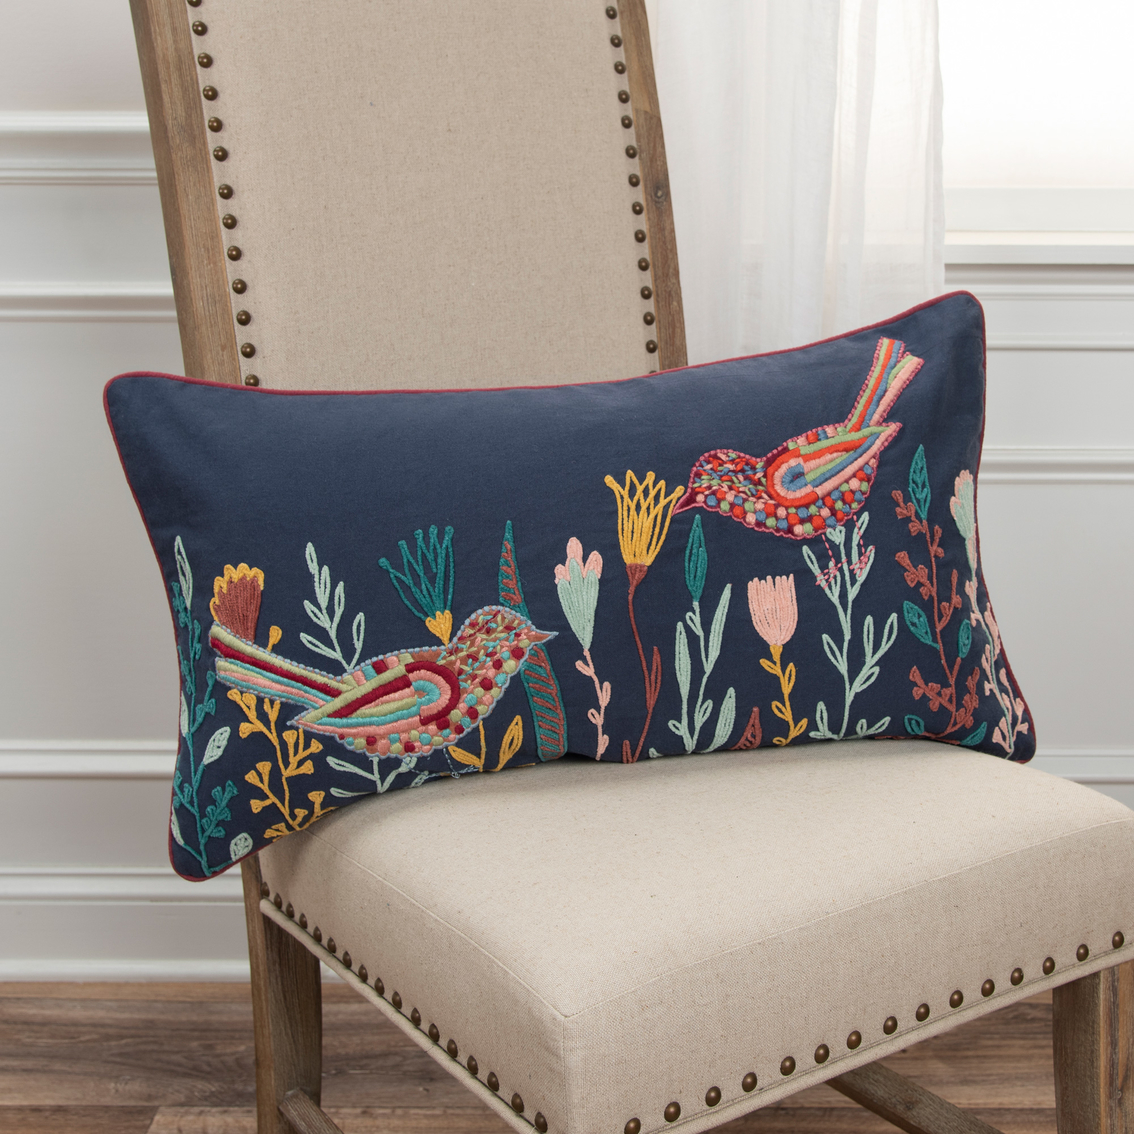 Rizzy Home Birds 14 x 26 in. Polyester Filled Pillow - Image 2 of 5